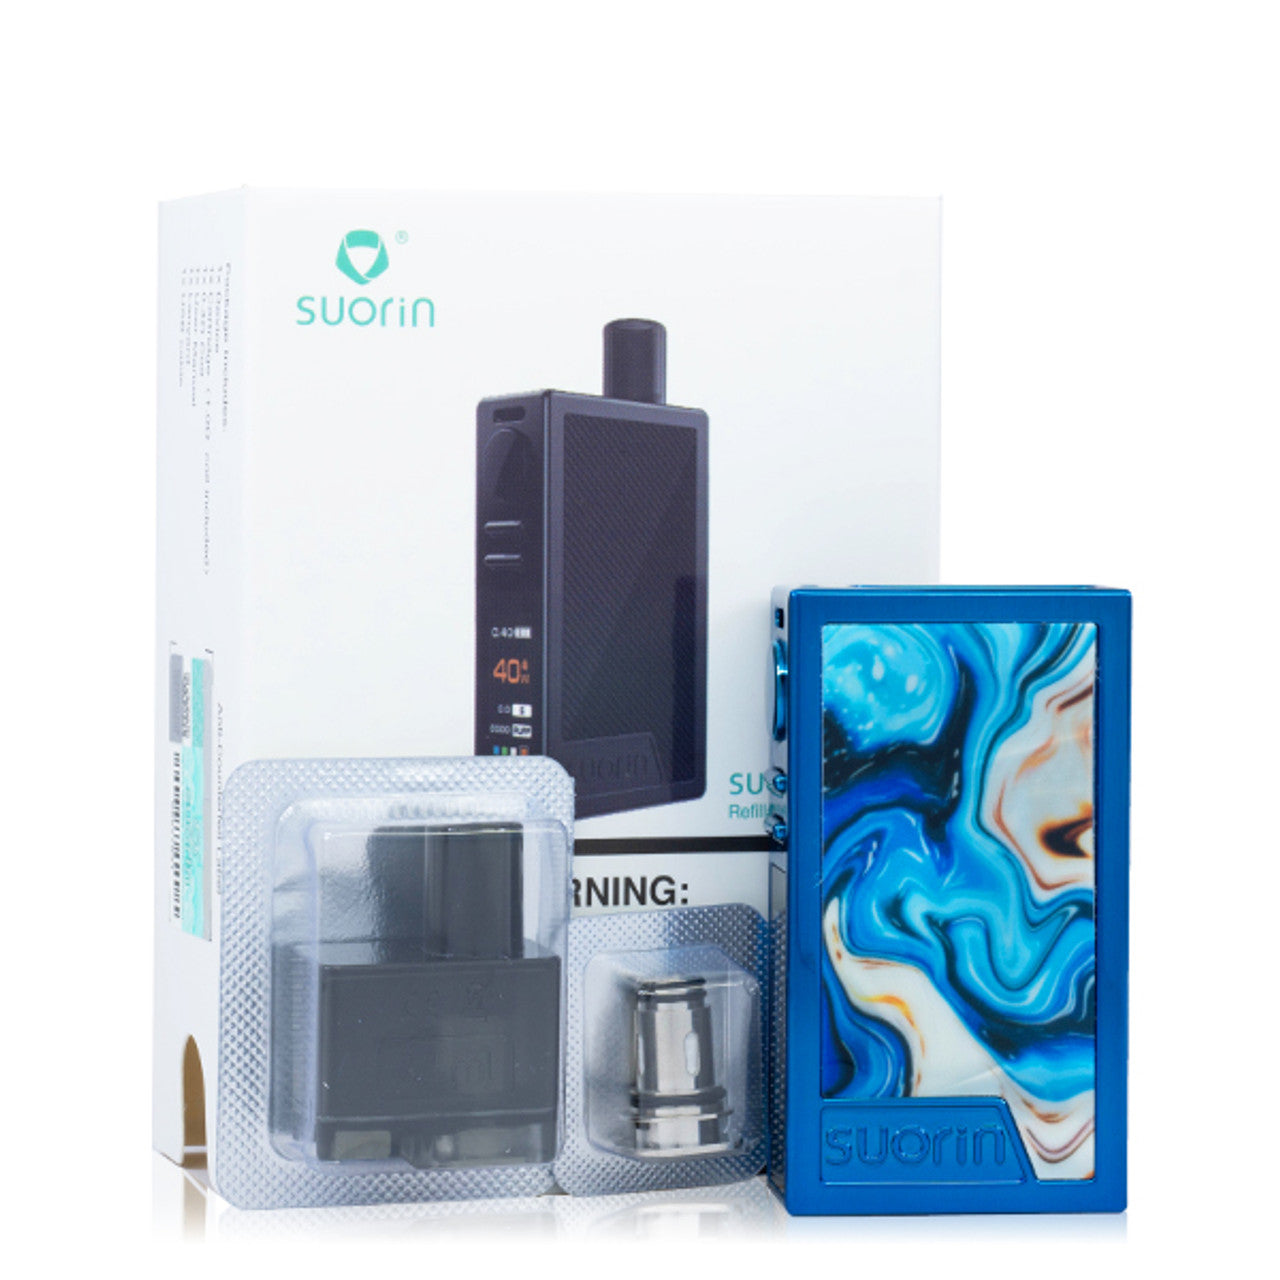 Suorin Elite Pod System Kit 40w with packaging